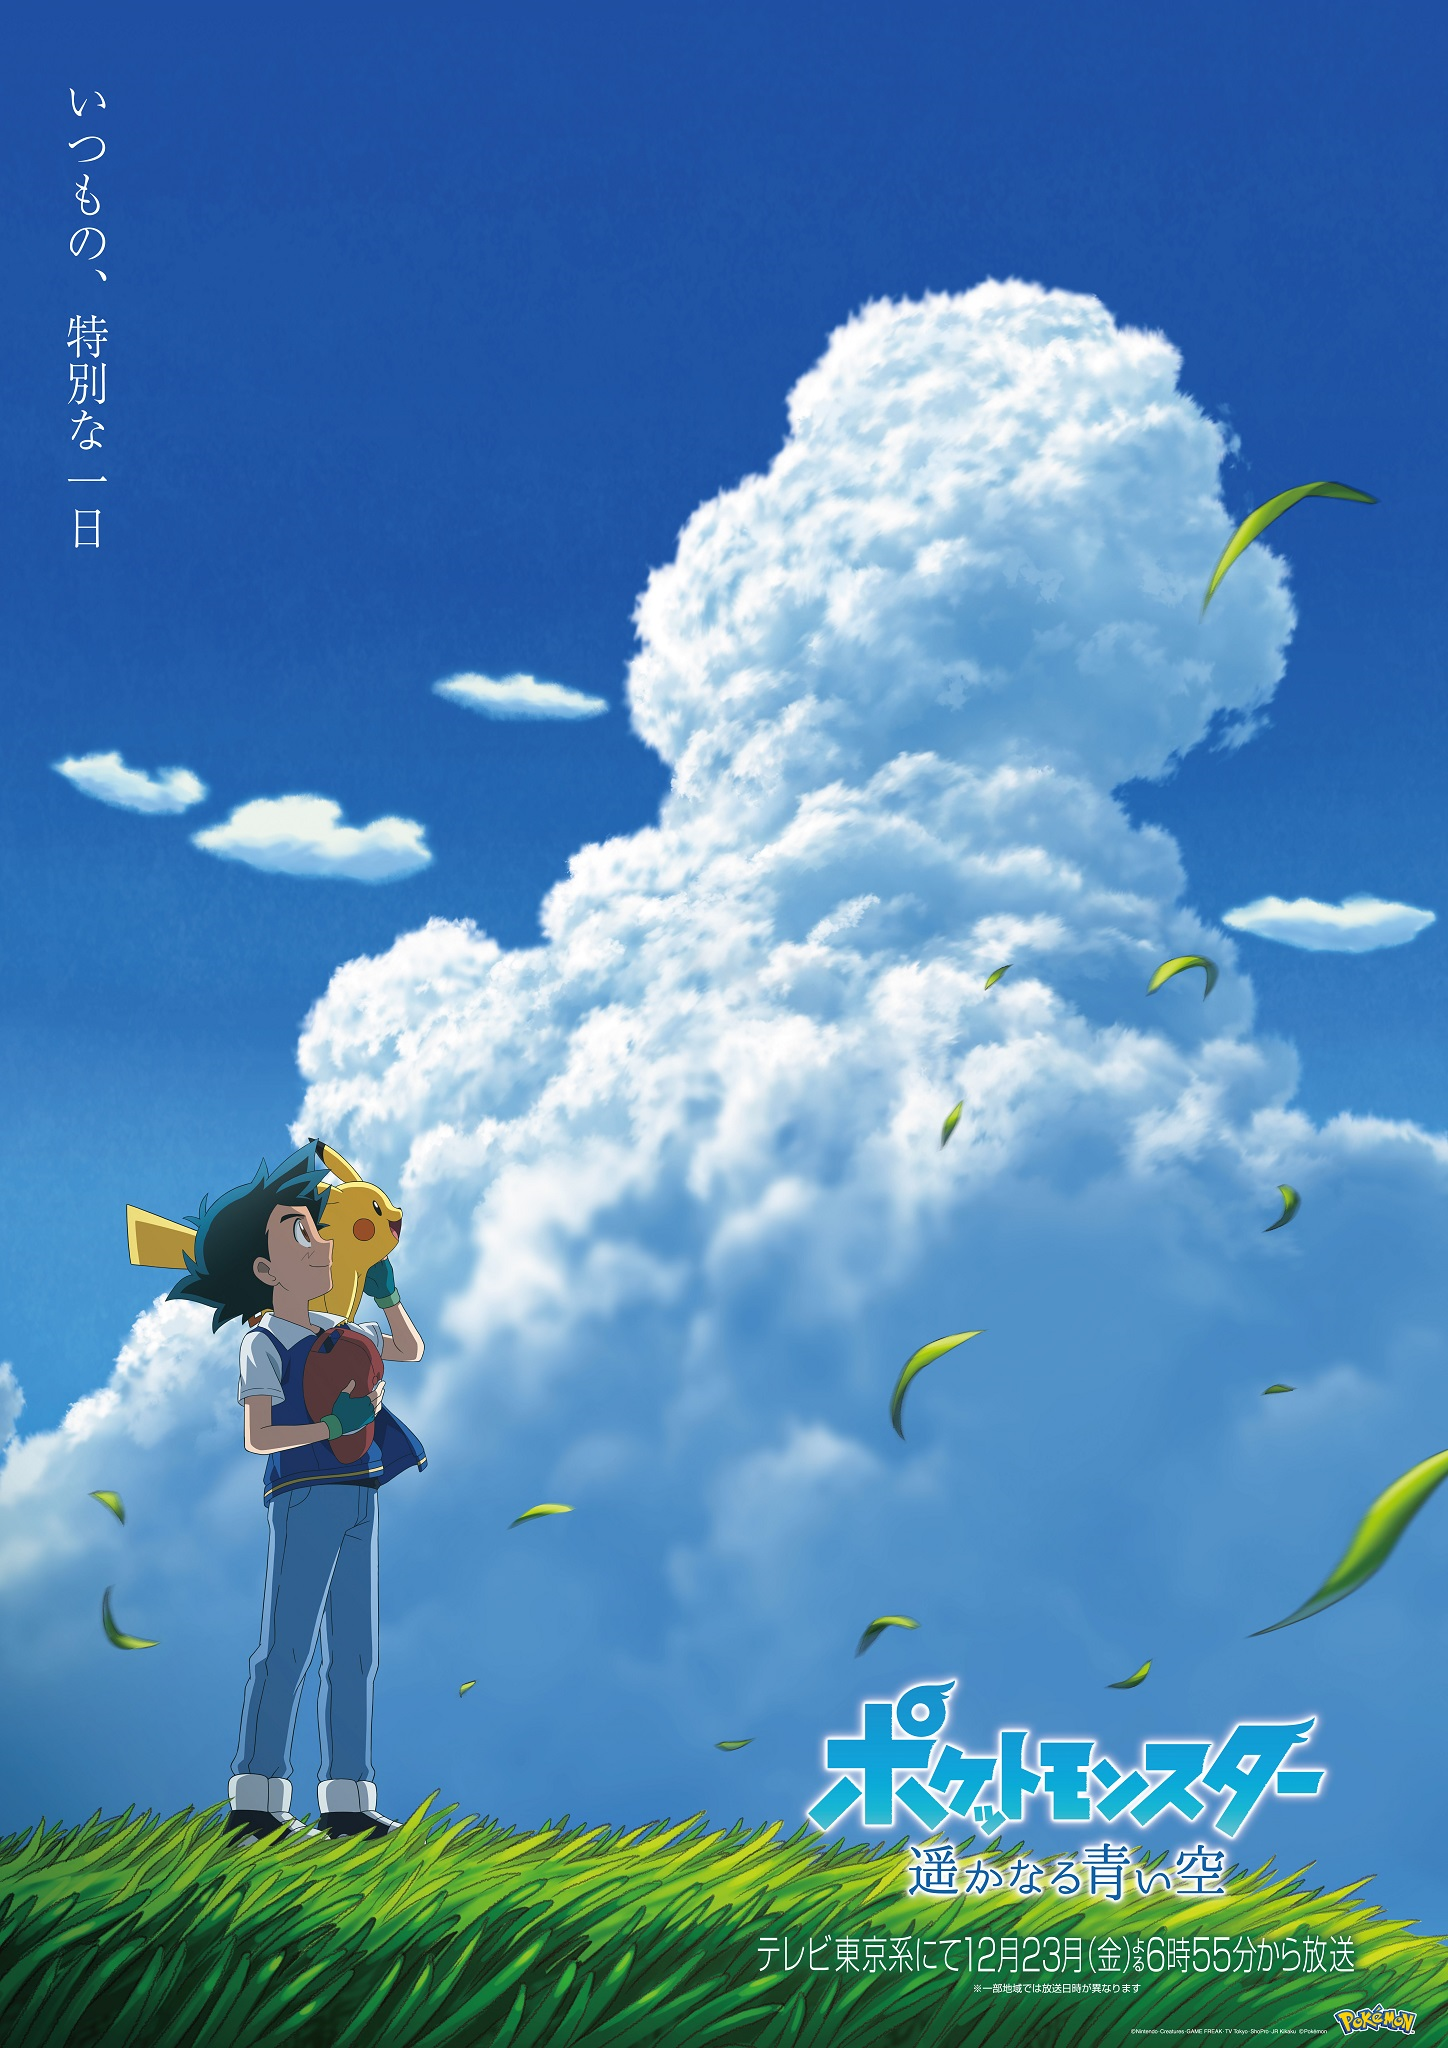 Pocket Monsters: The Distant Blue Sky to air December 23rd, 2022 